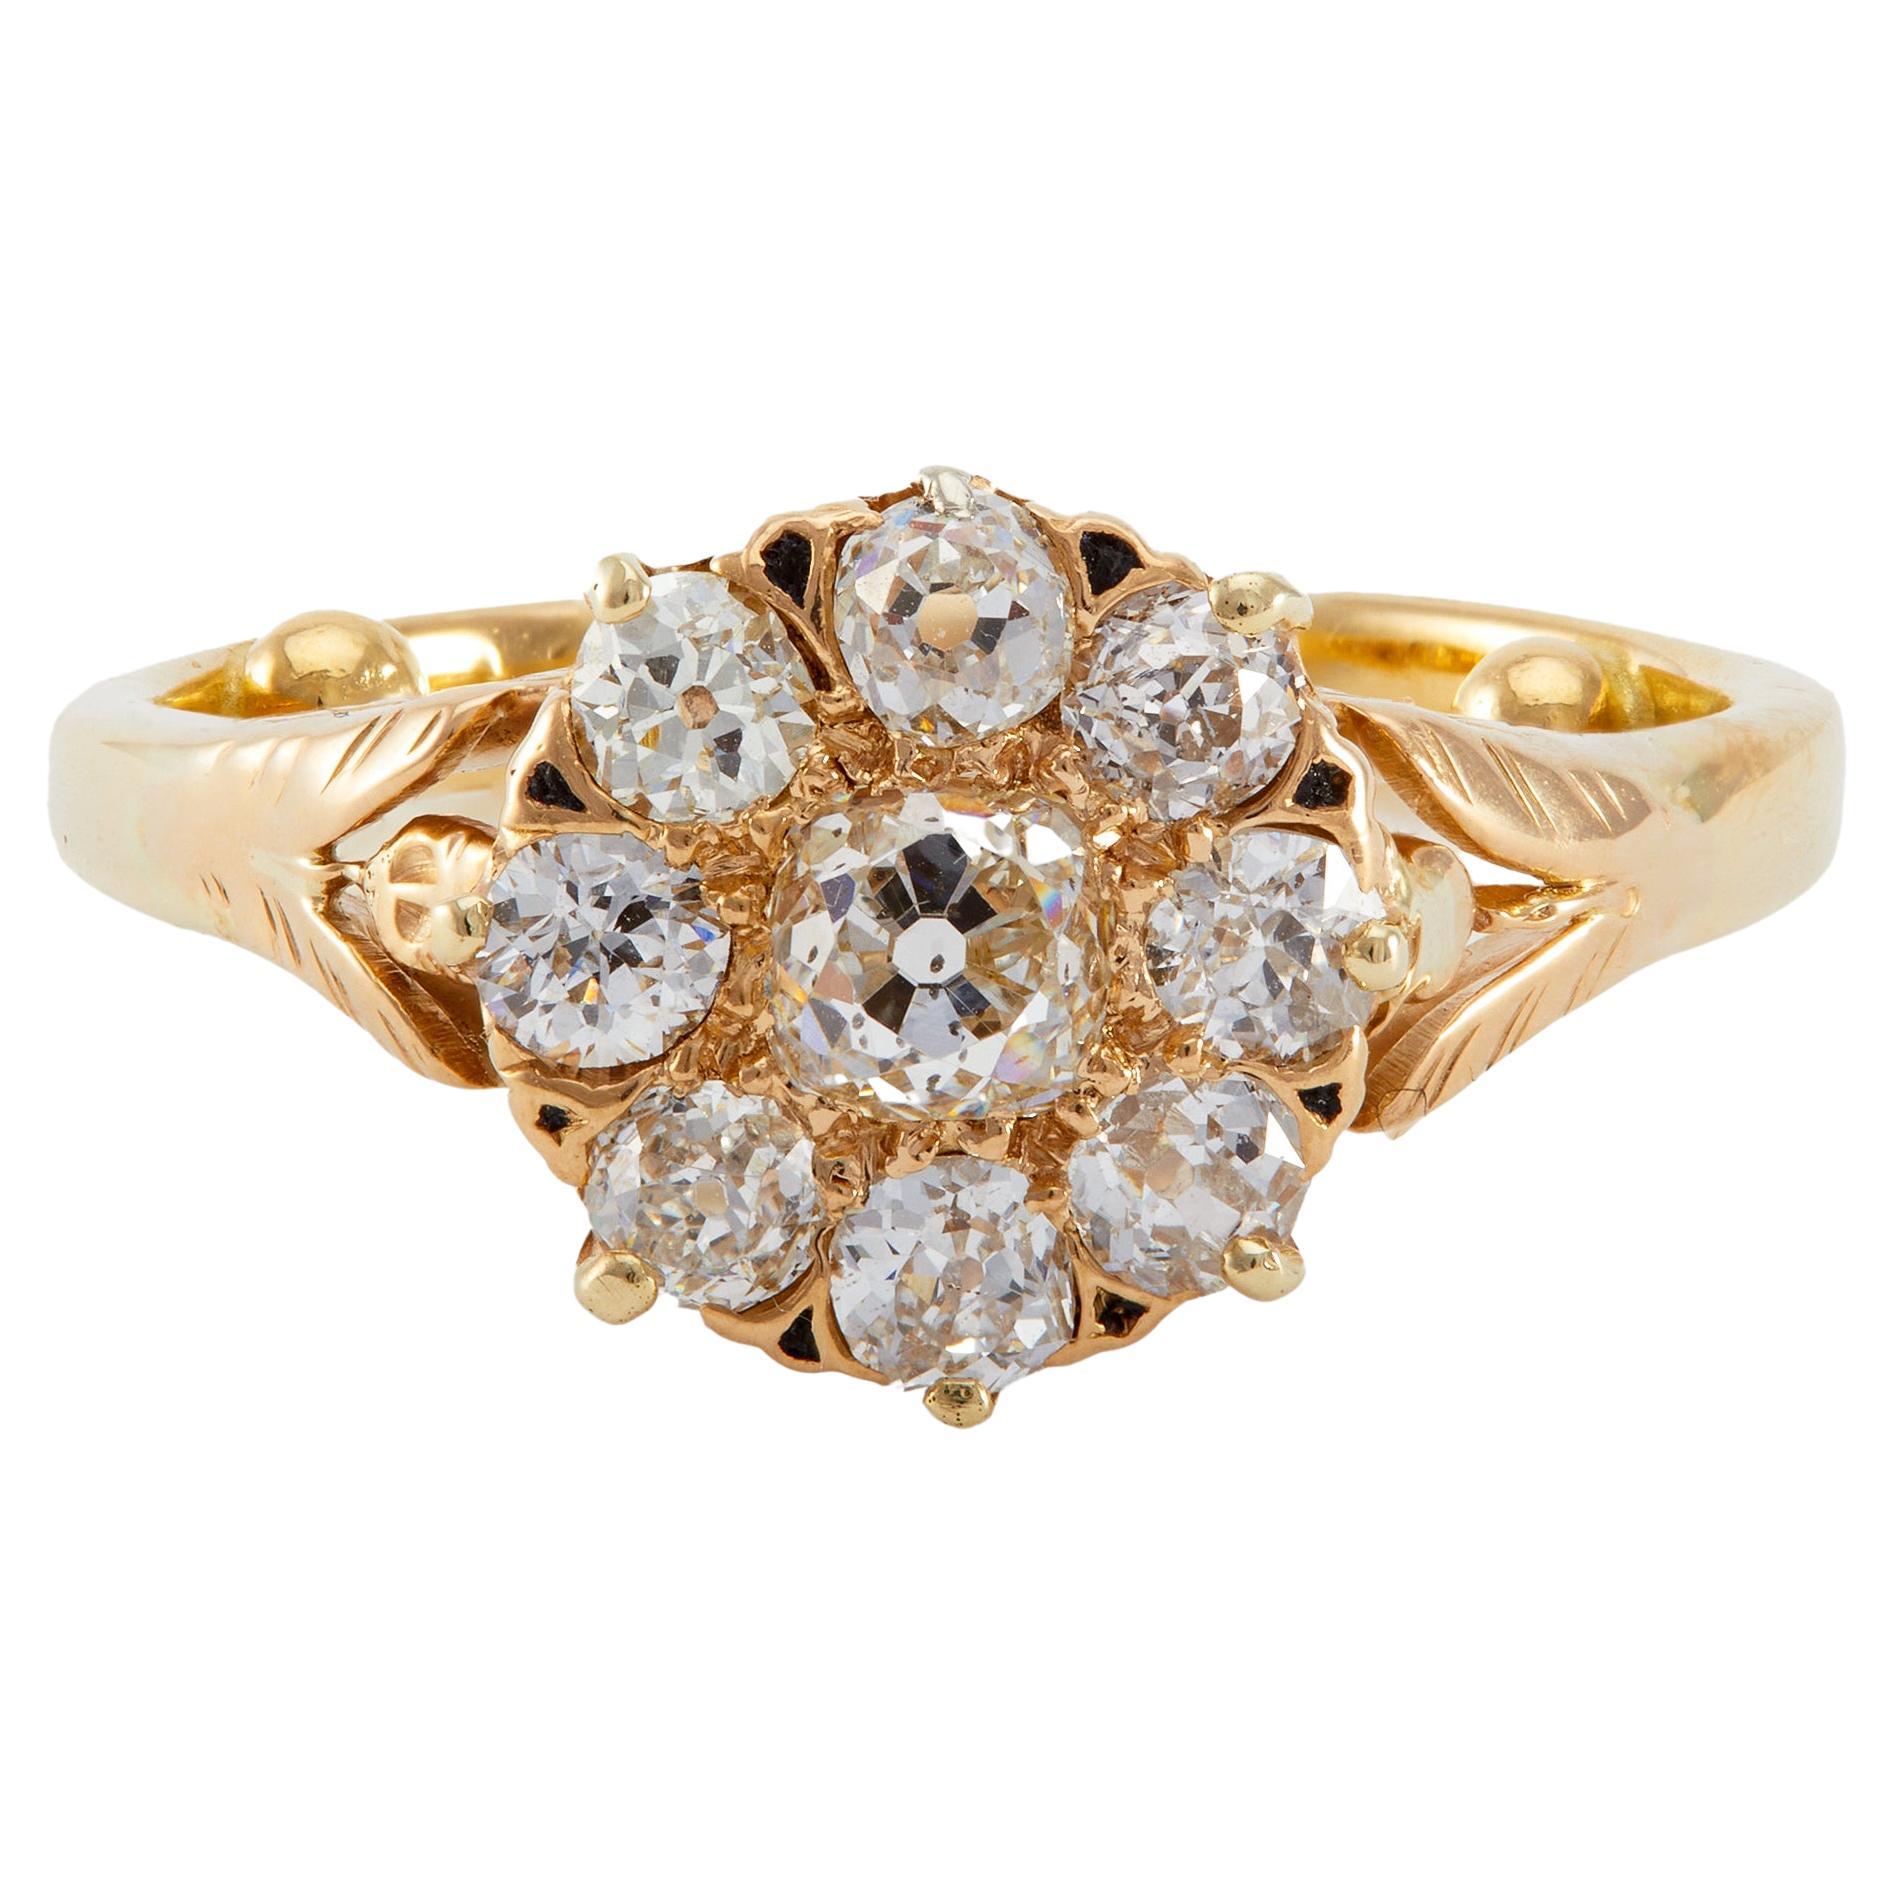 Edwardian 7 Diamond Cluster Ring with Scalloped Setting in 14k White ...